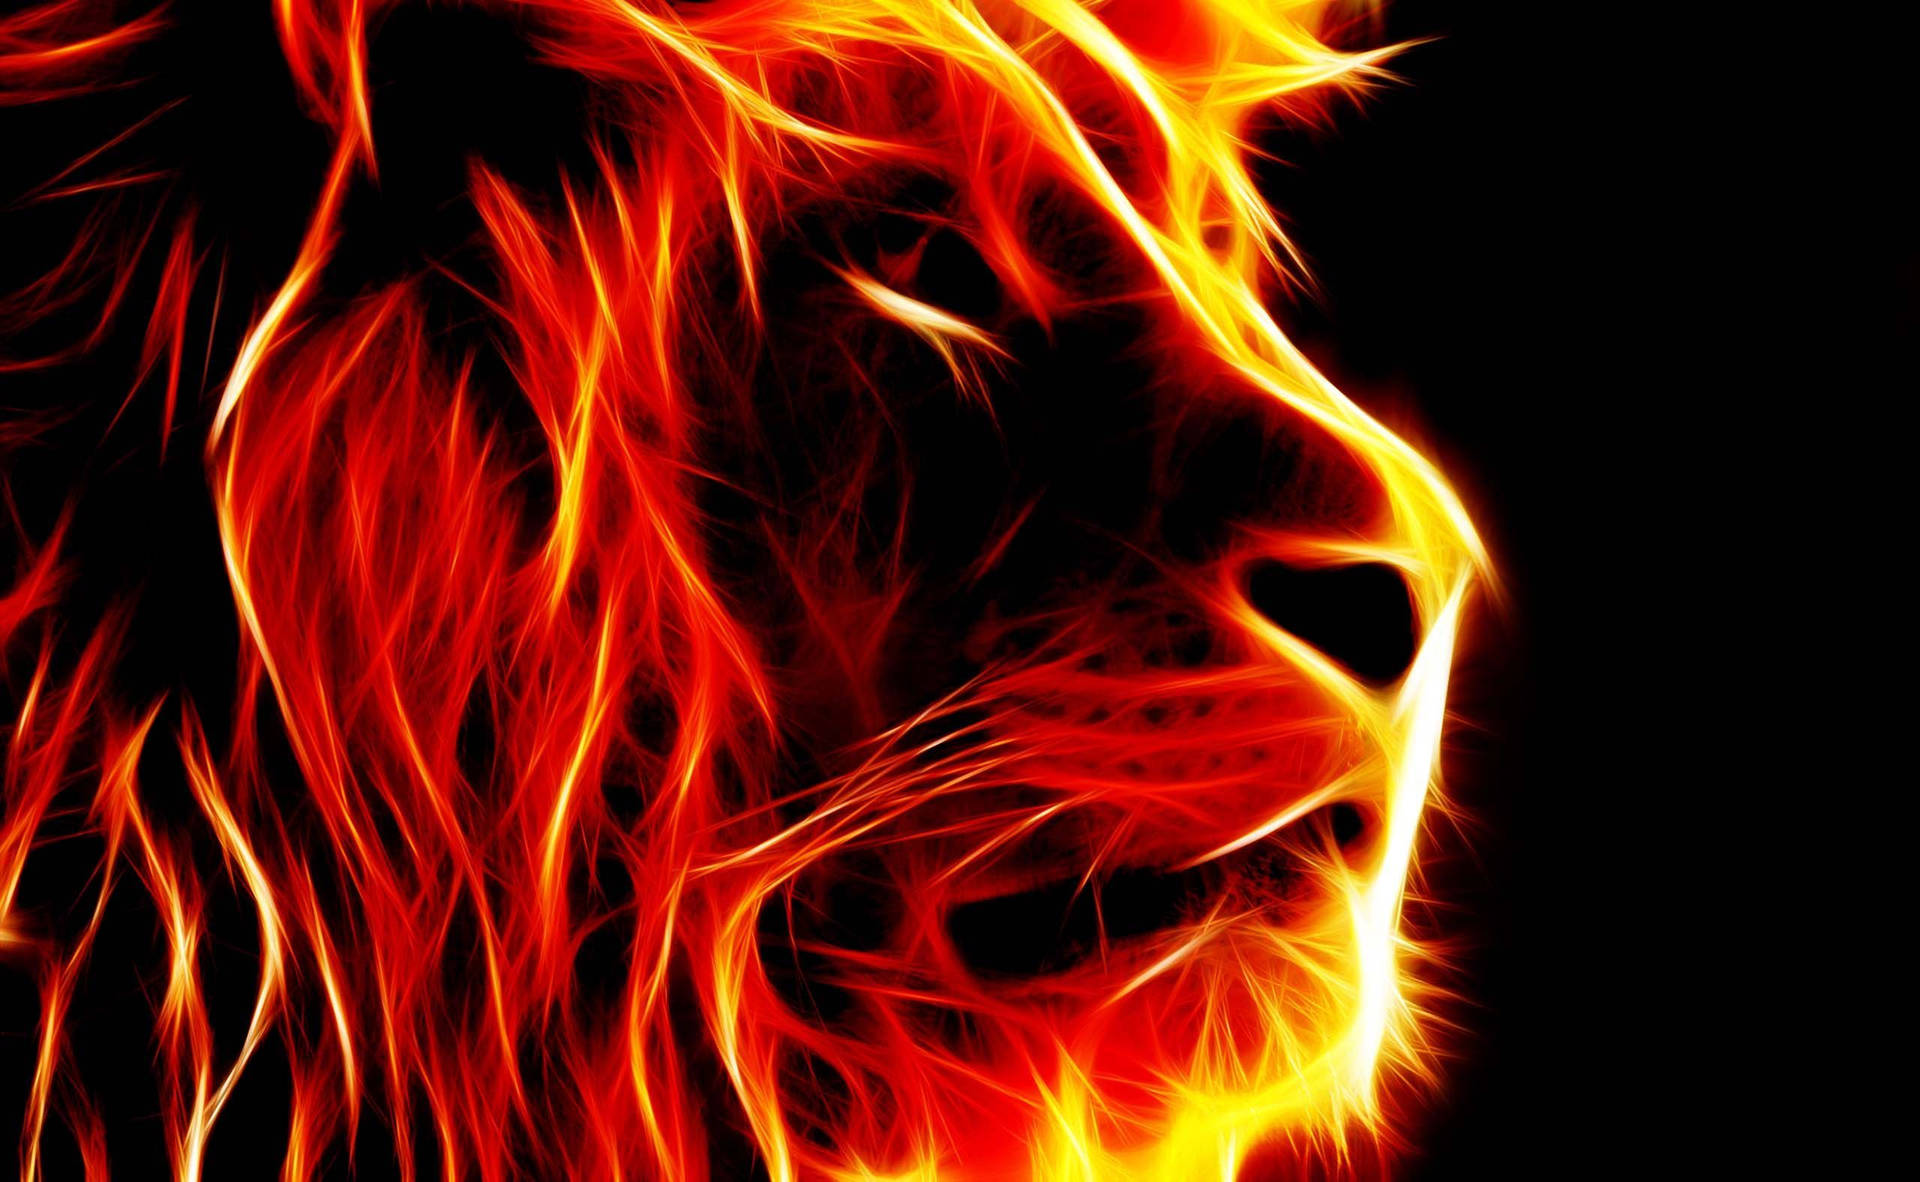 A Lion's Head In Flames On A Black Background Wallpaper